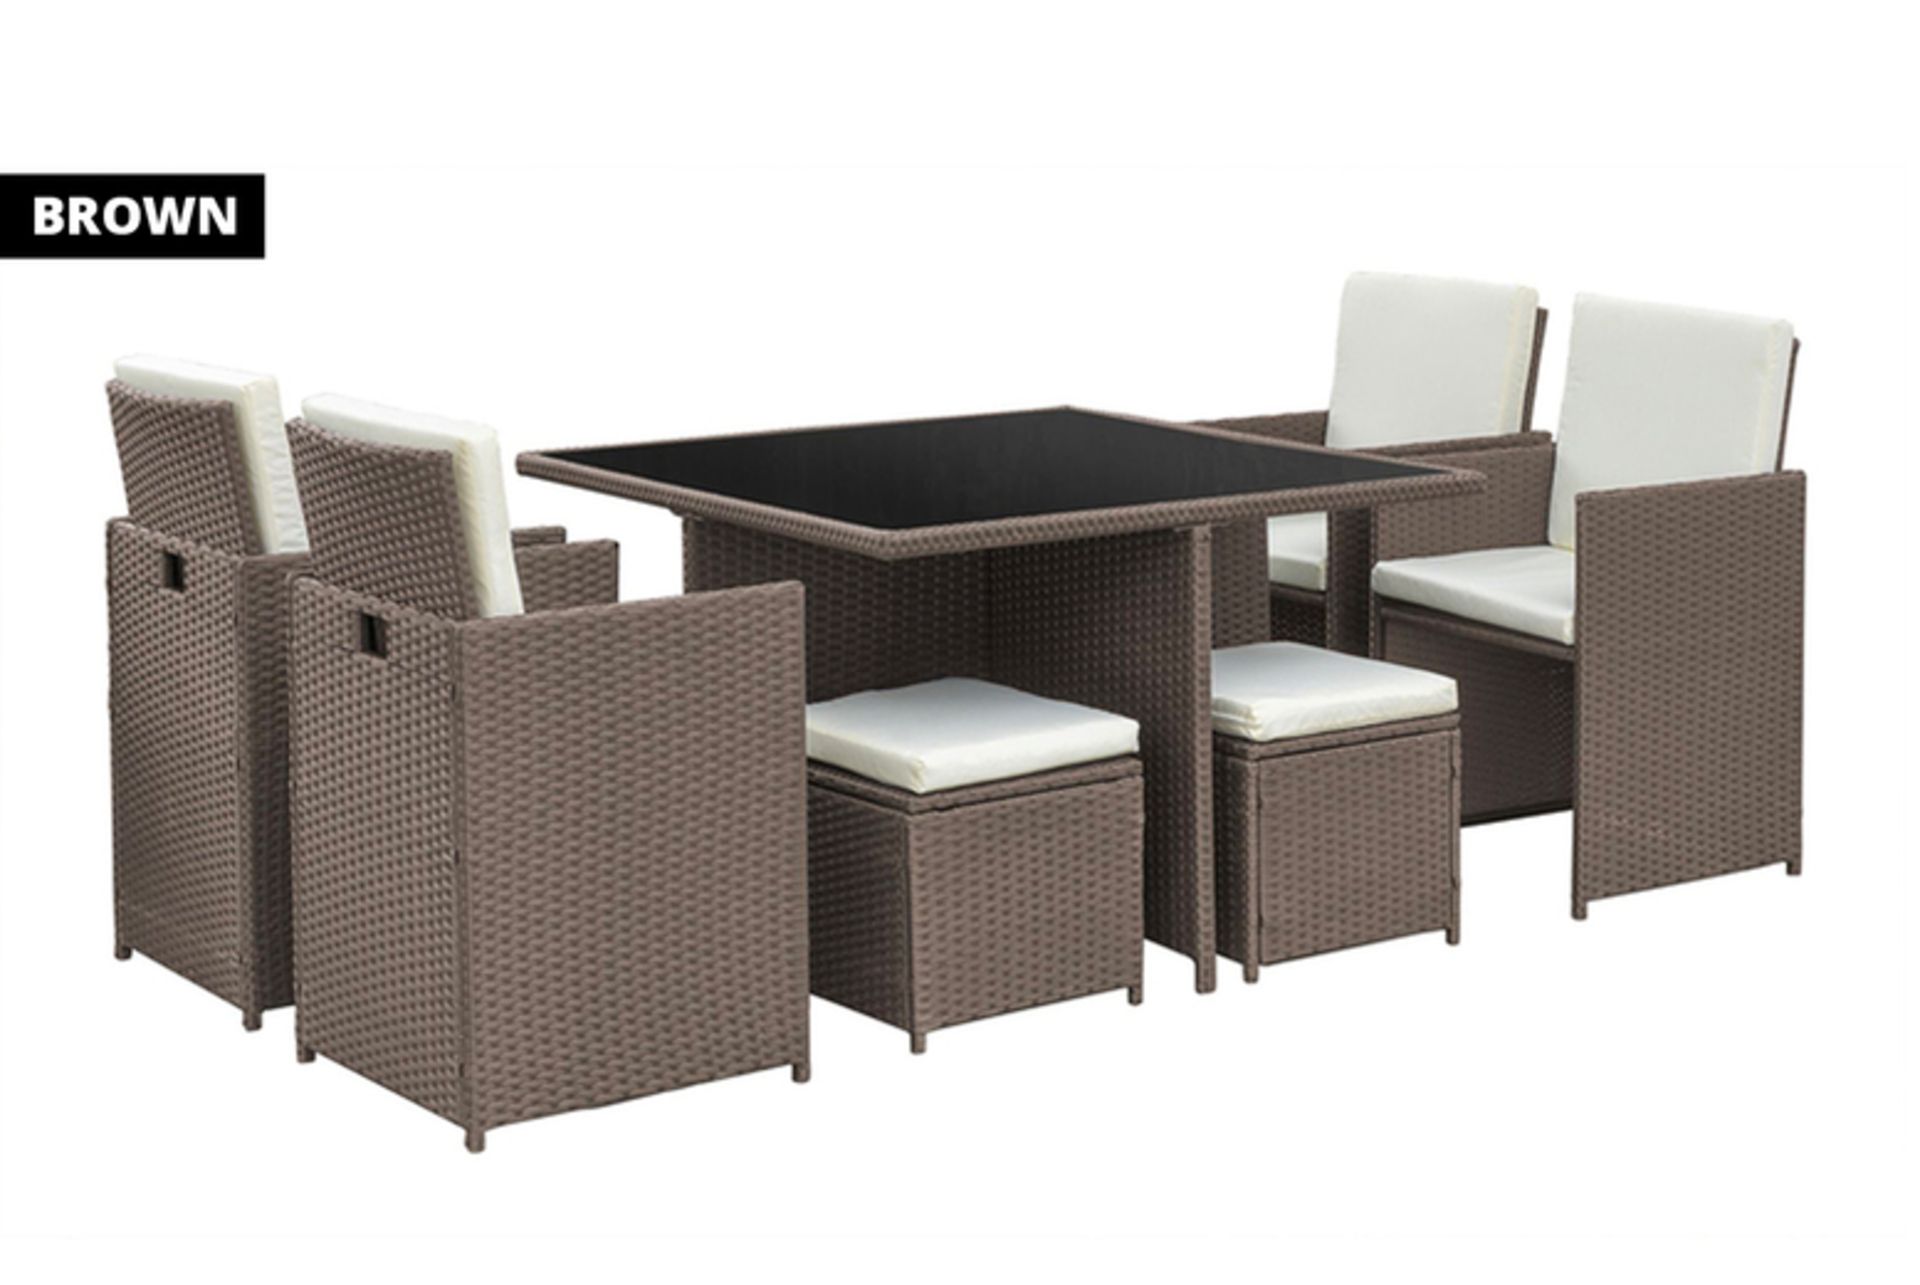 8-Seater Monument Rattan Cube Garden Furniture Dining Set - Brown - Image 2 of 3